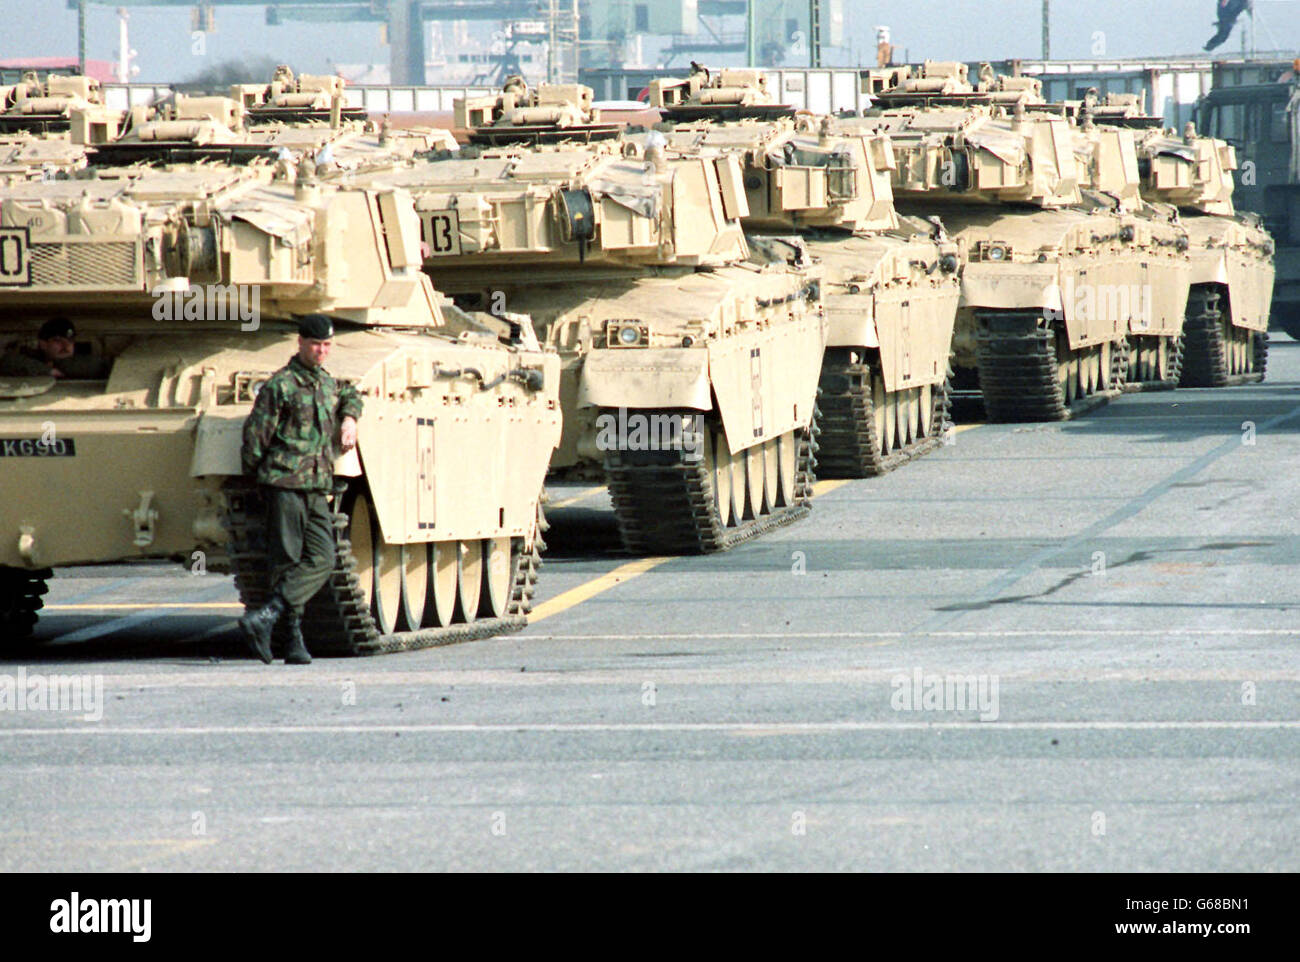 Mark Wells. Soldier Mark Wells, with challenger tanks, waiting for embarkation at Bremerhaven, Germany. Stock Photo